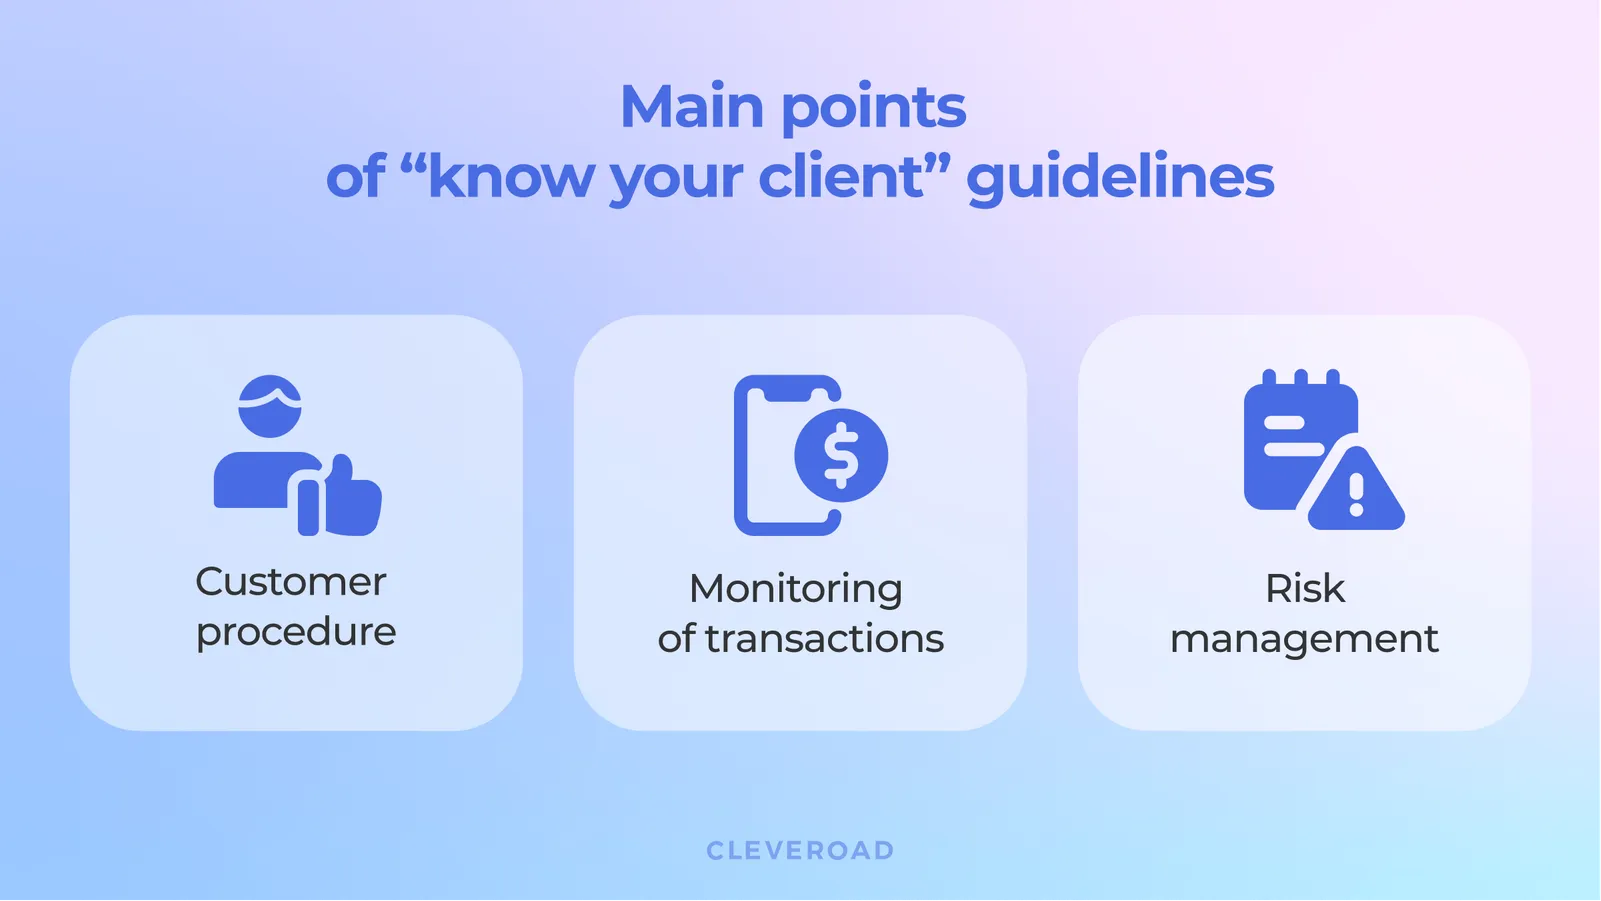 How to comply with know your client?